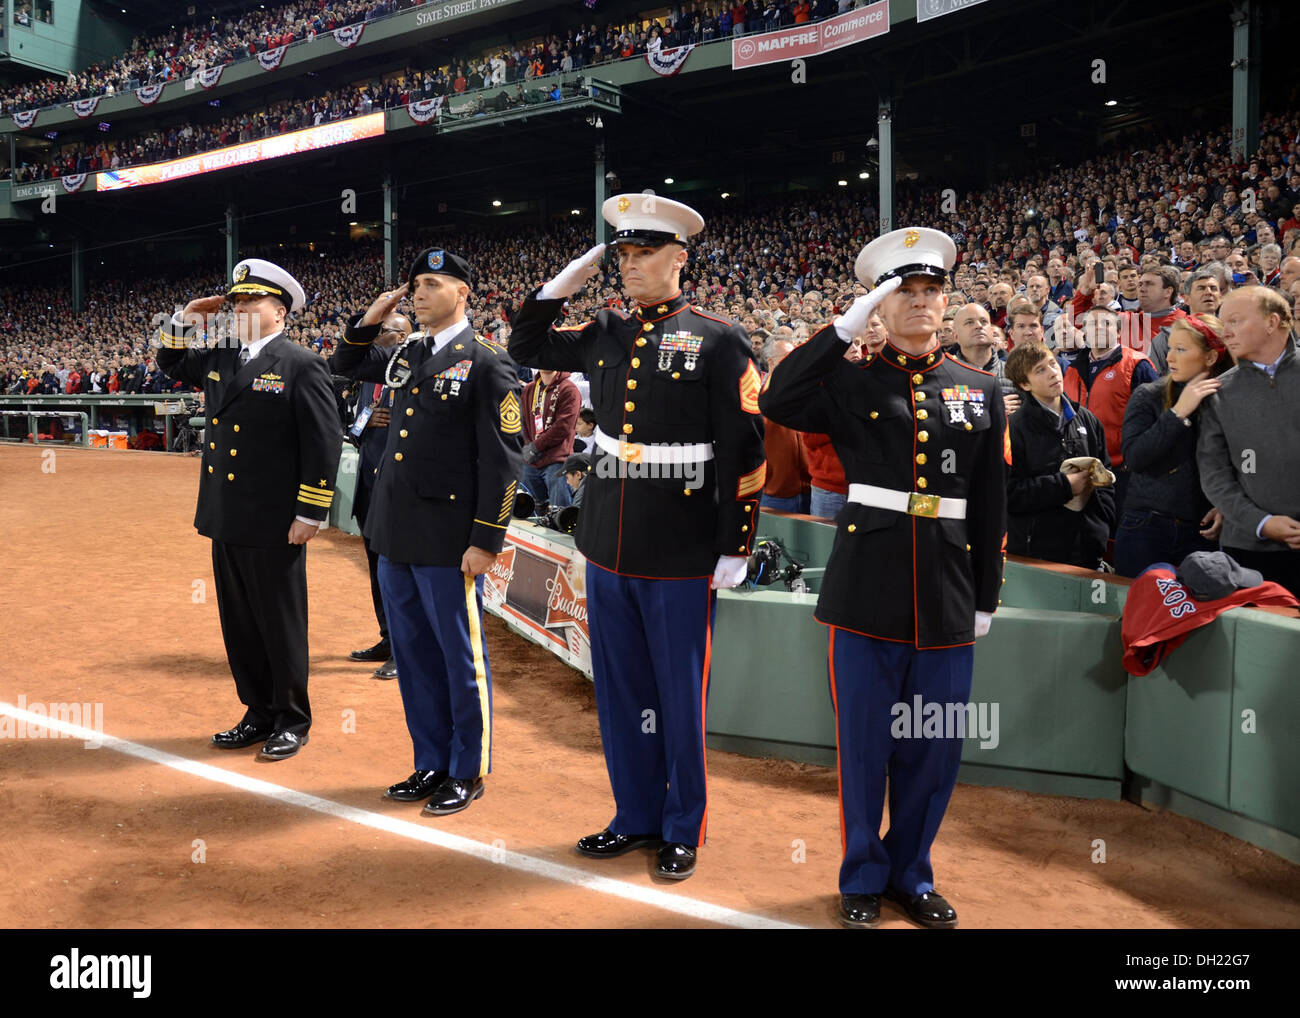 Cmdr. Sean Kearns, 73rd commanding officer of USS Constitution, far left, salutes the national ensign along with service members from the U.S. Army and Marine Corps during the singing of the national anthem at Game 1 of the World Series at Fenway Park. Sa Stock Photo